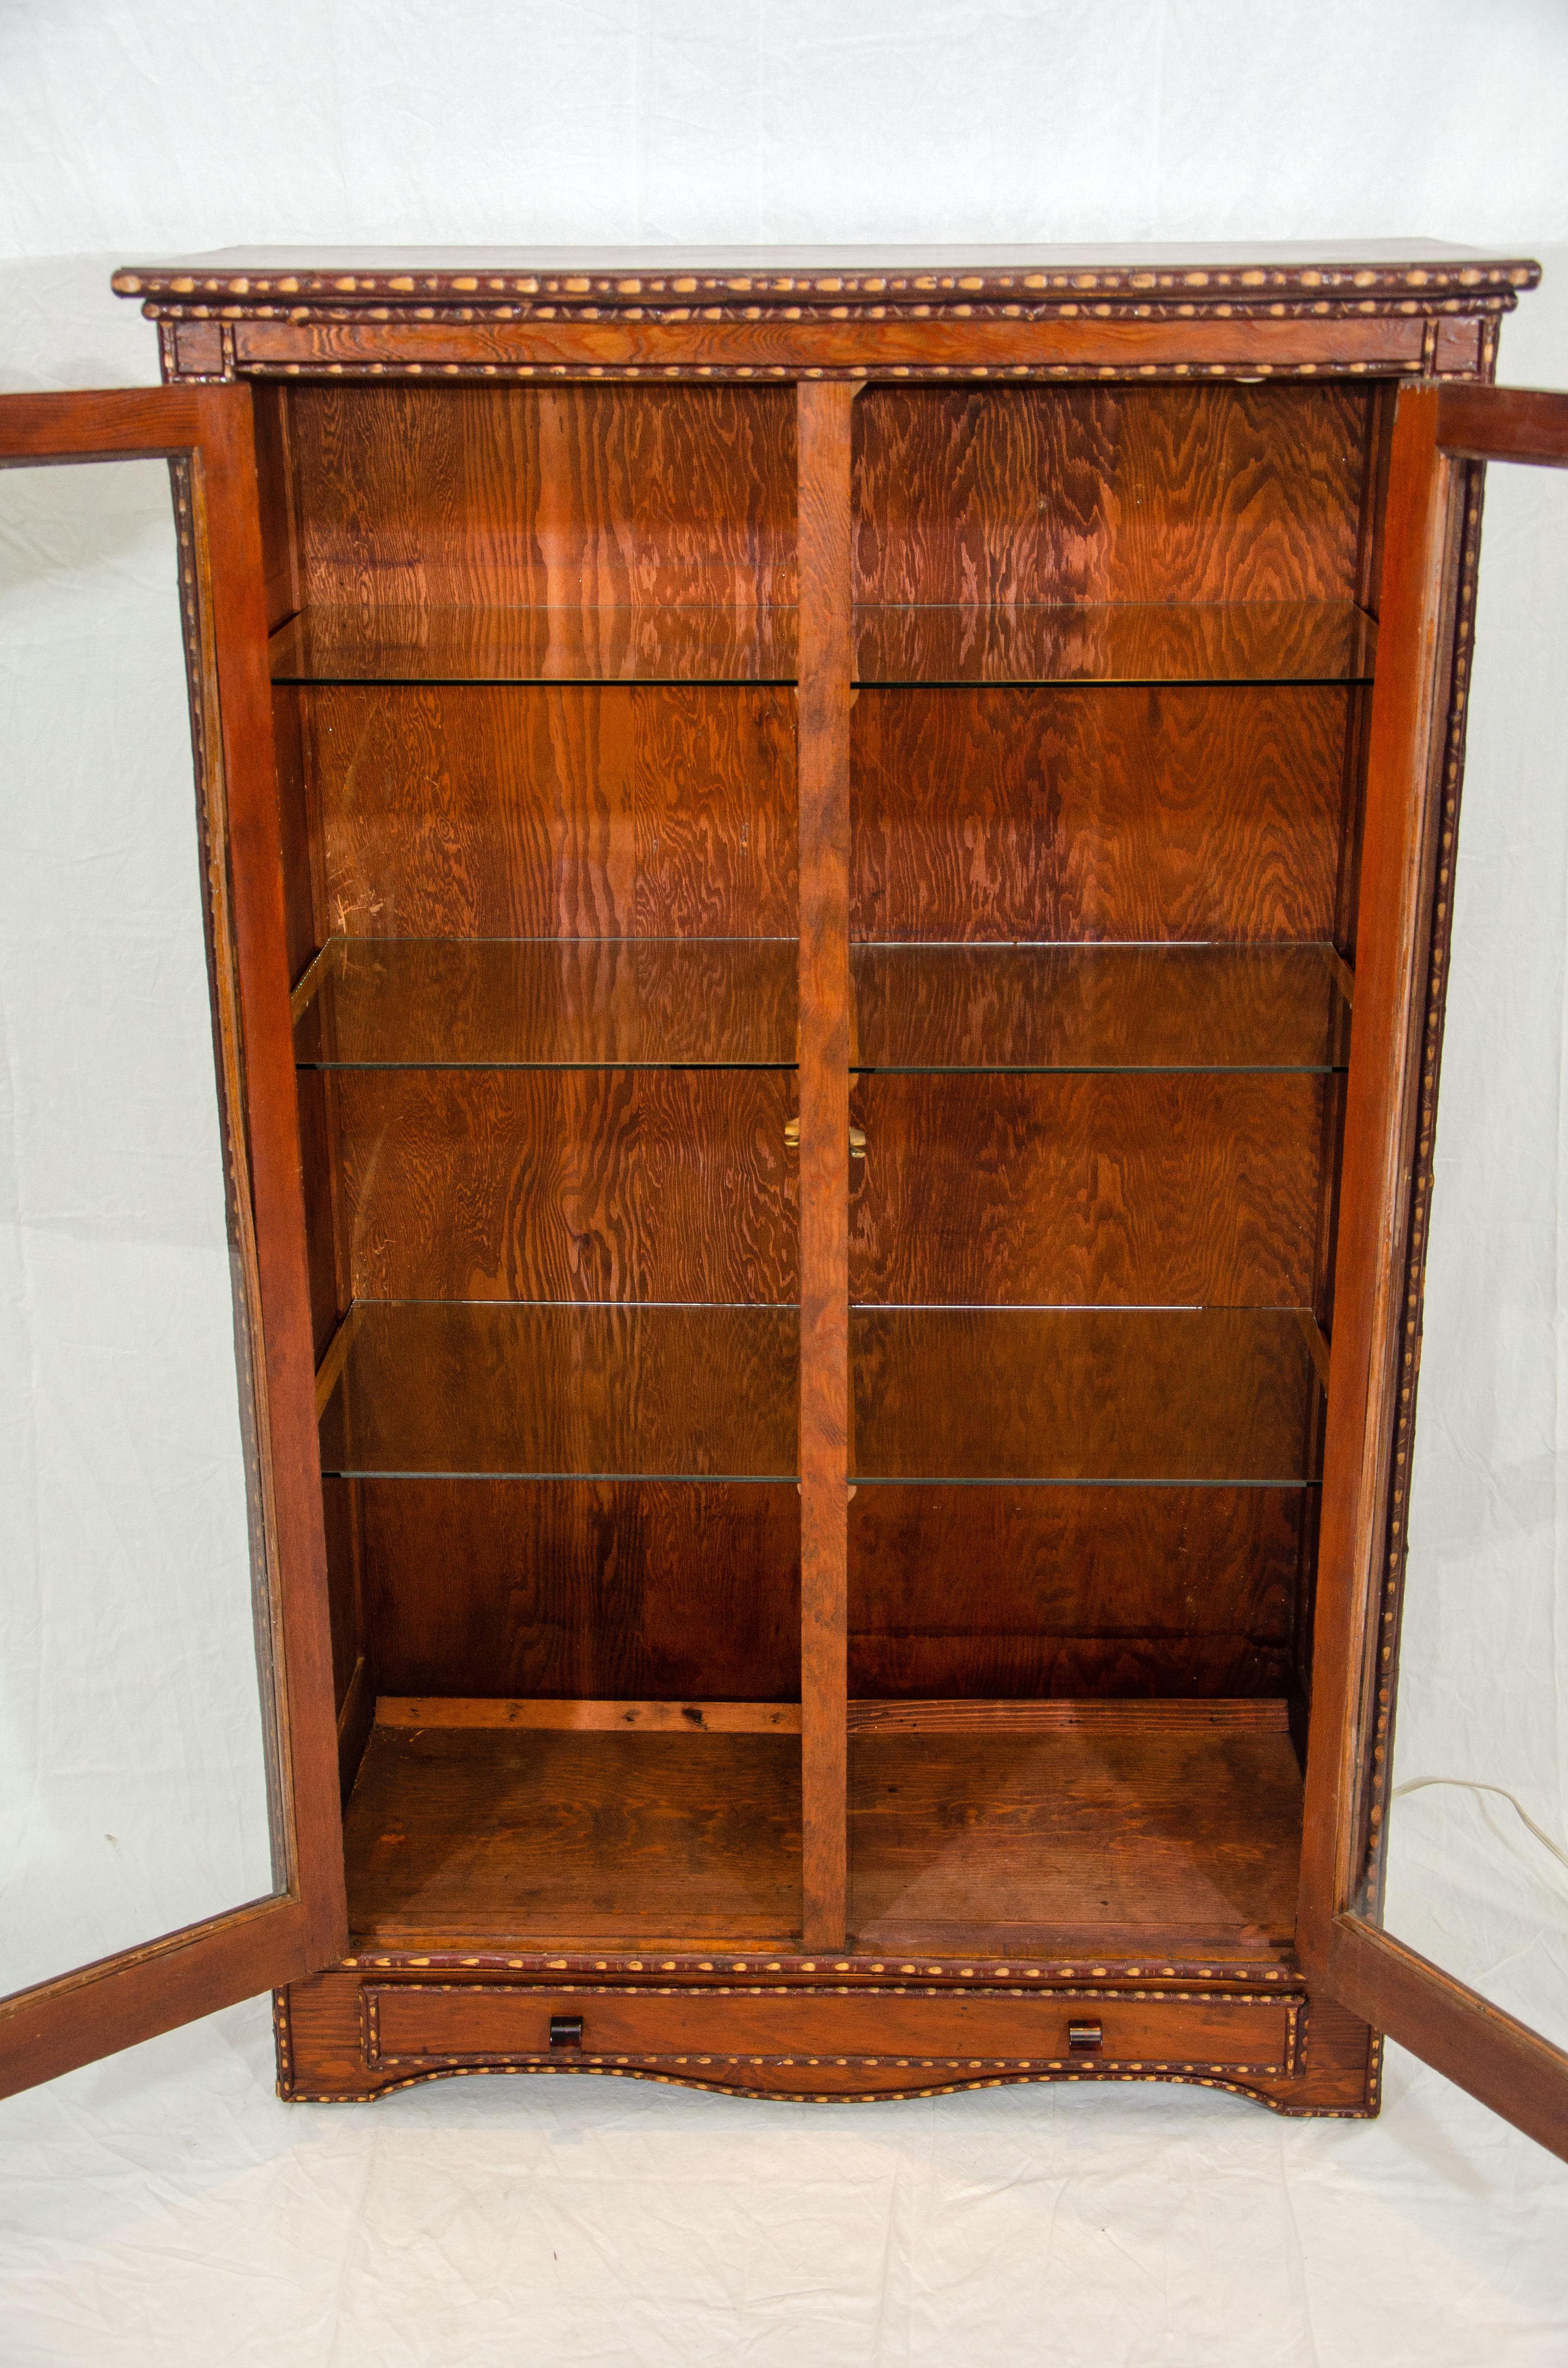 Vintage Adirondack Bookcase In Good Condition For Sale In Crockett, CA